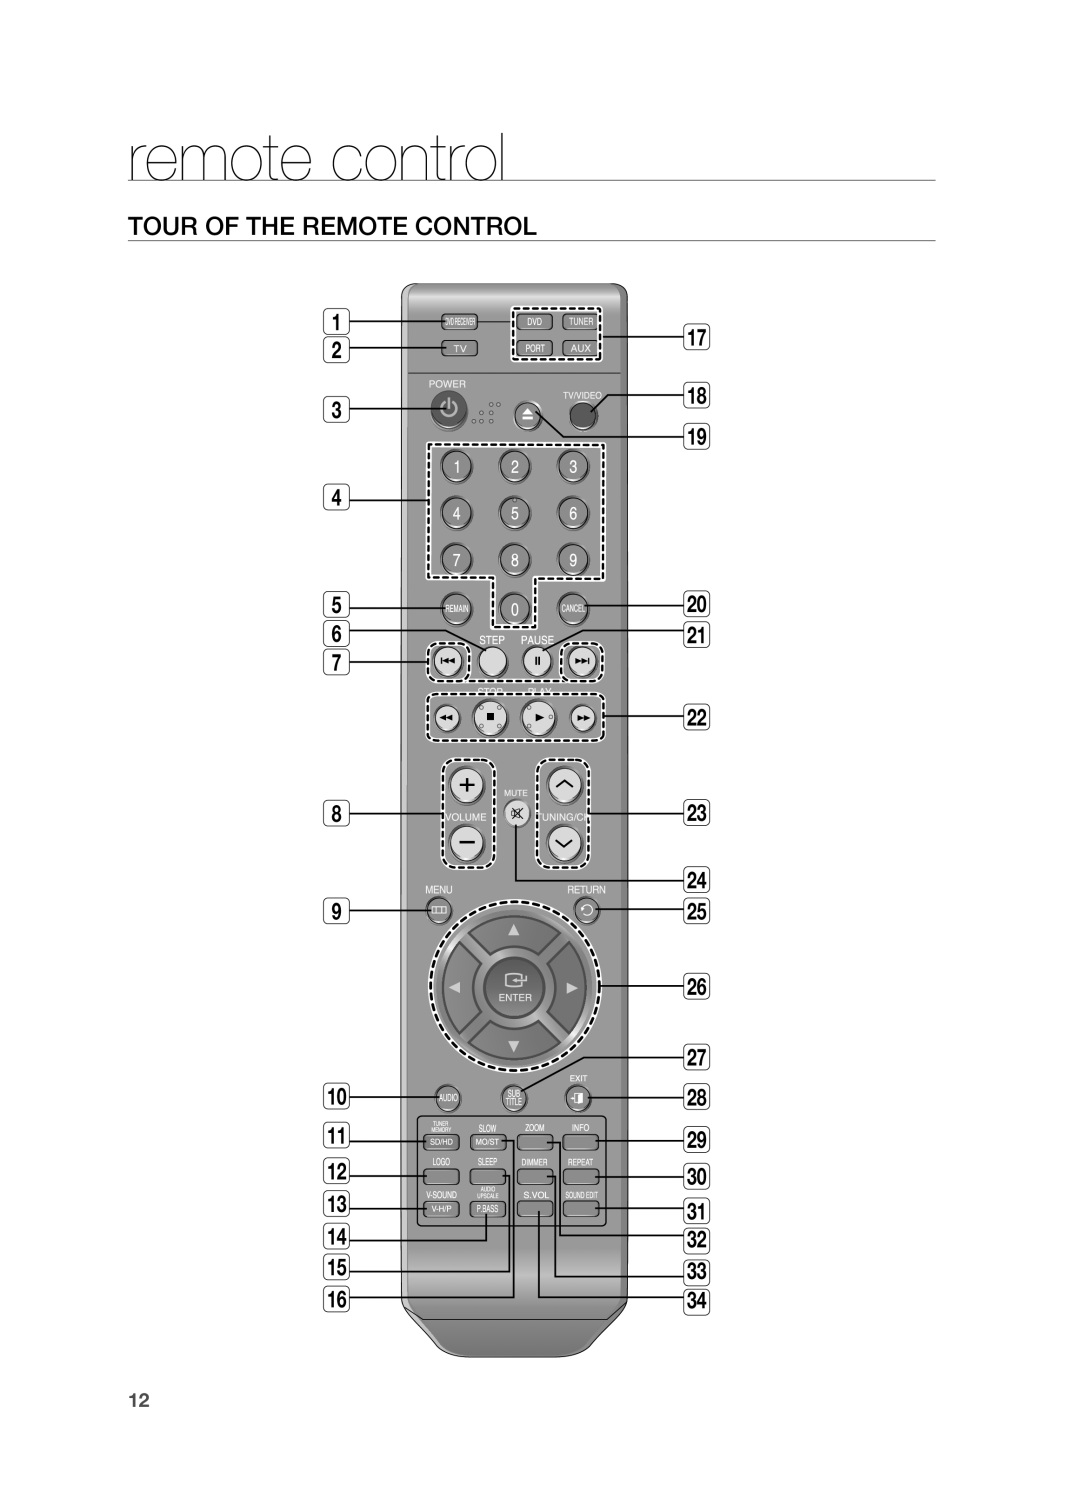 Samsung HT-X710 user manual remote control, Tour of the Remote Control 